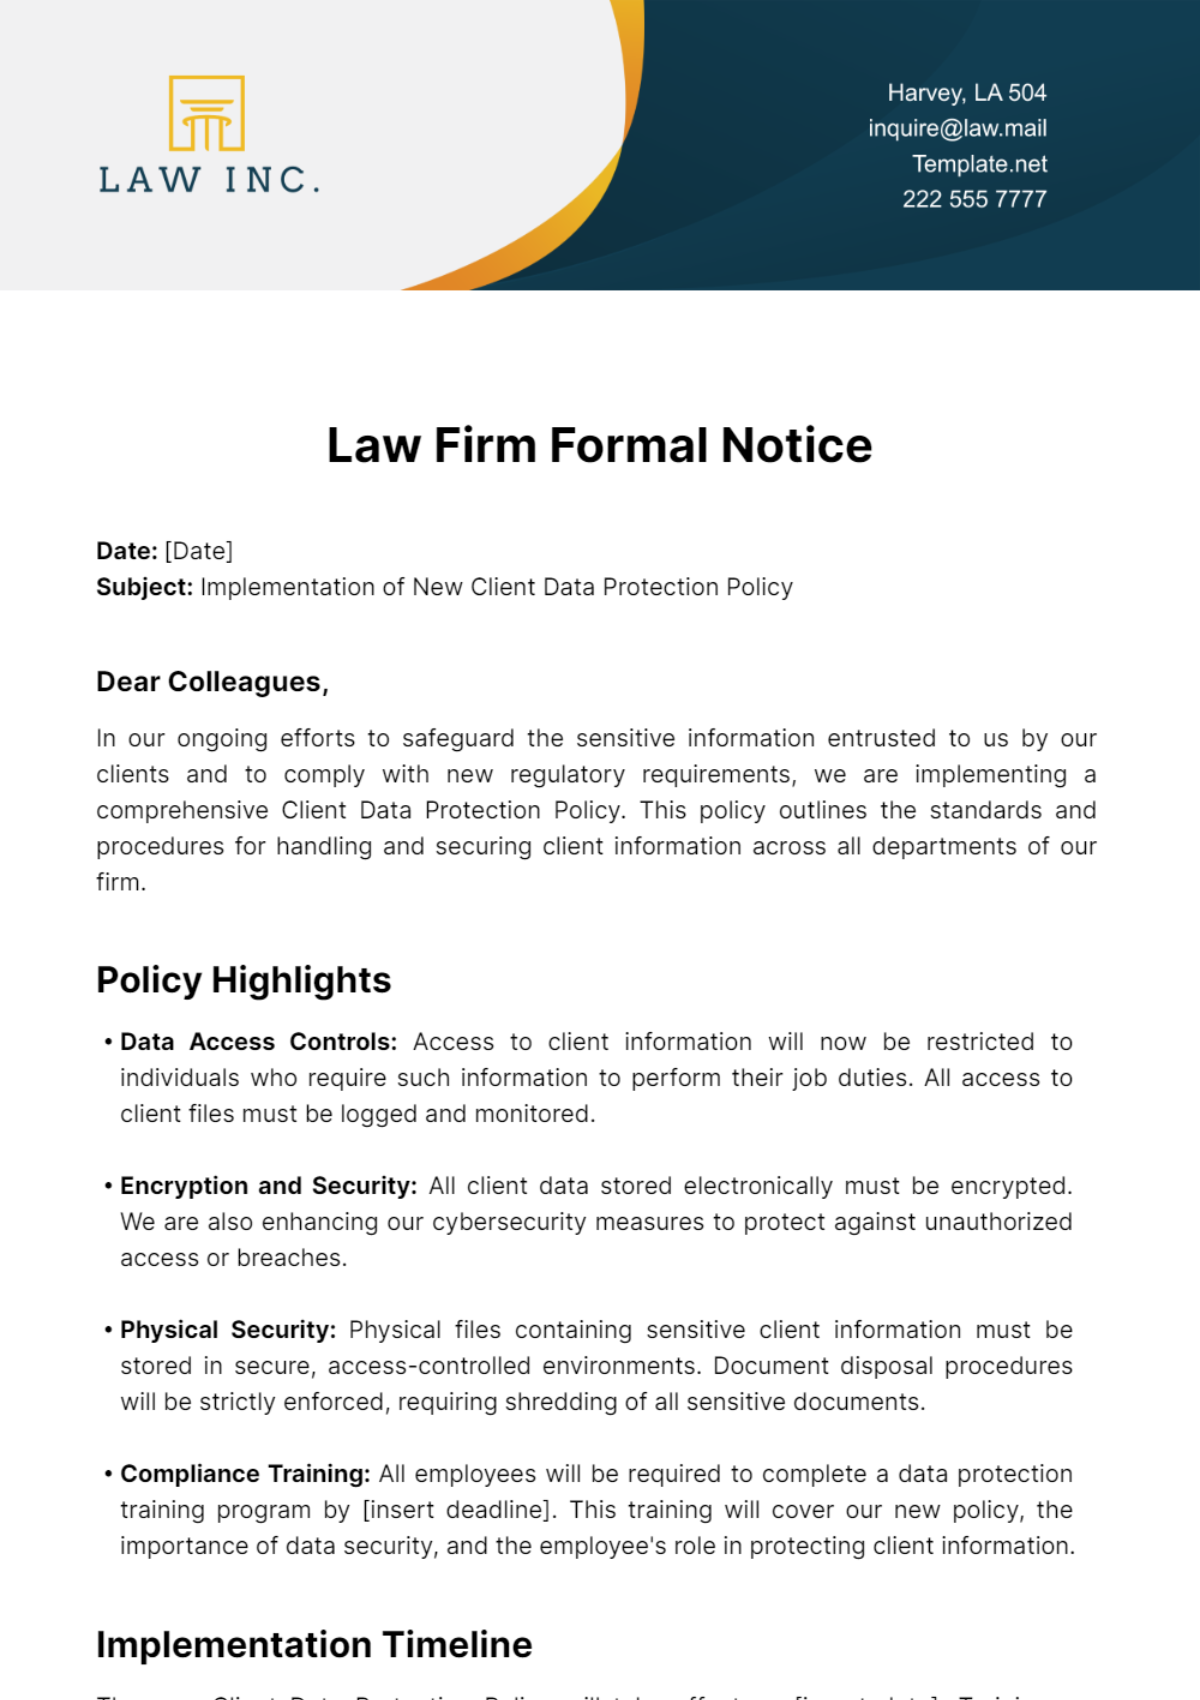 Free Law Firm Formal Notice Template